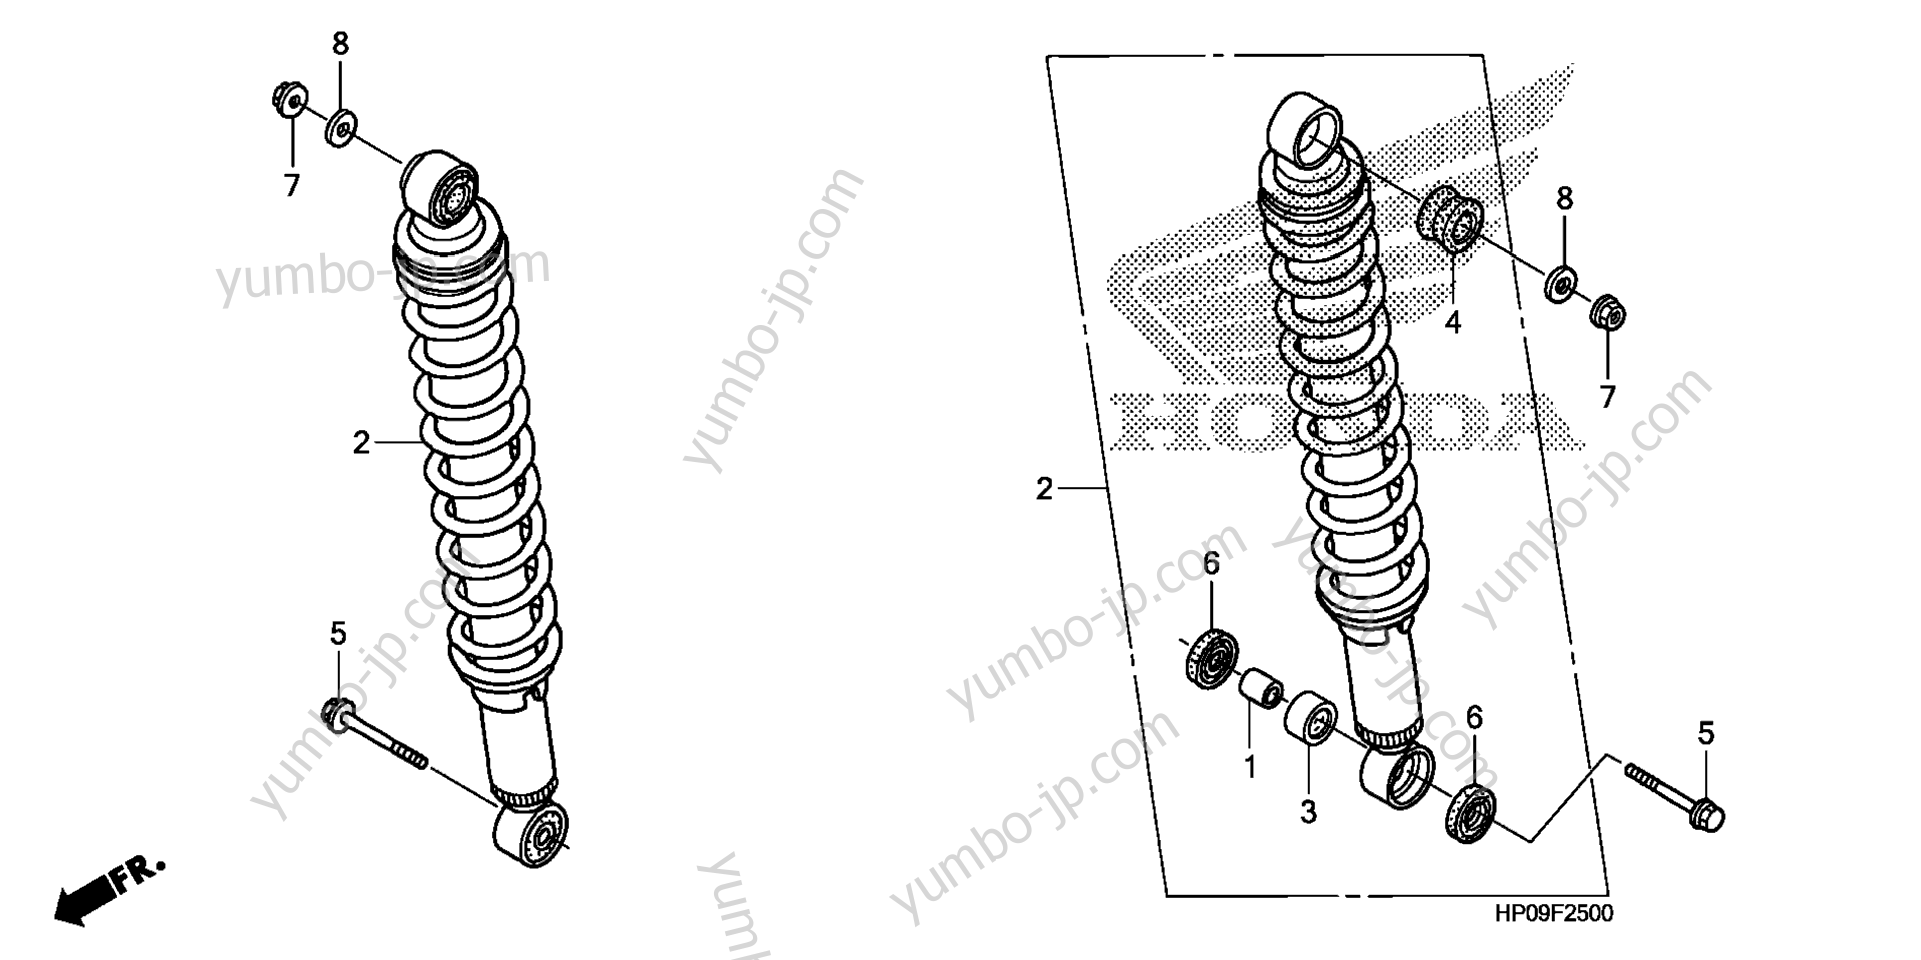 REAR SHOCK ABSORBER for ATVs HONDA TRX500FPM A 2009 year